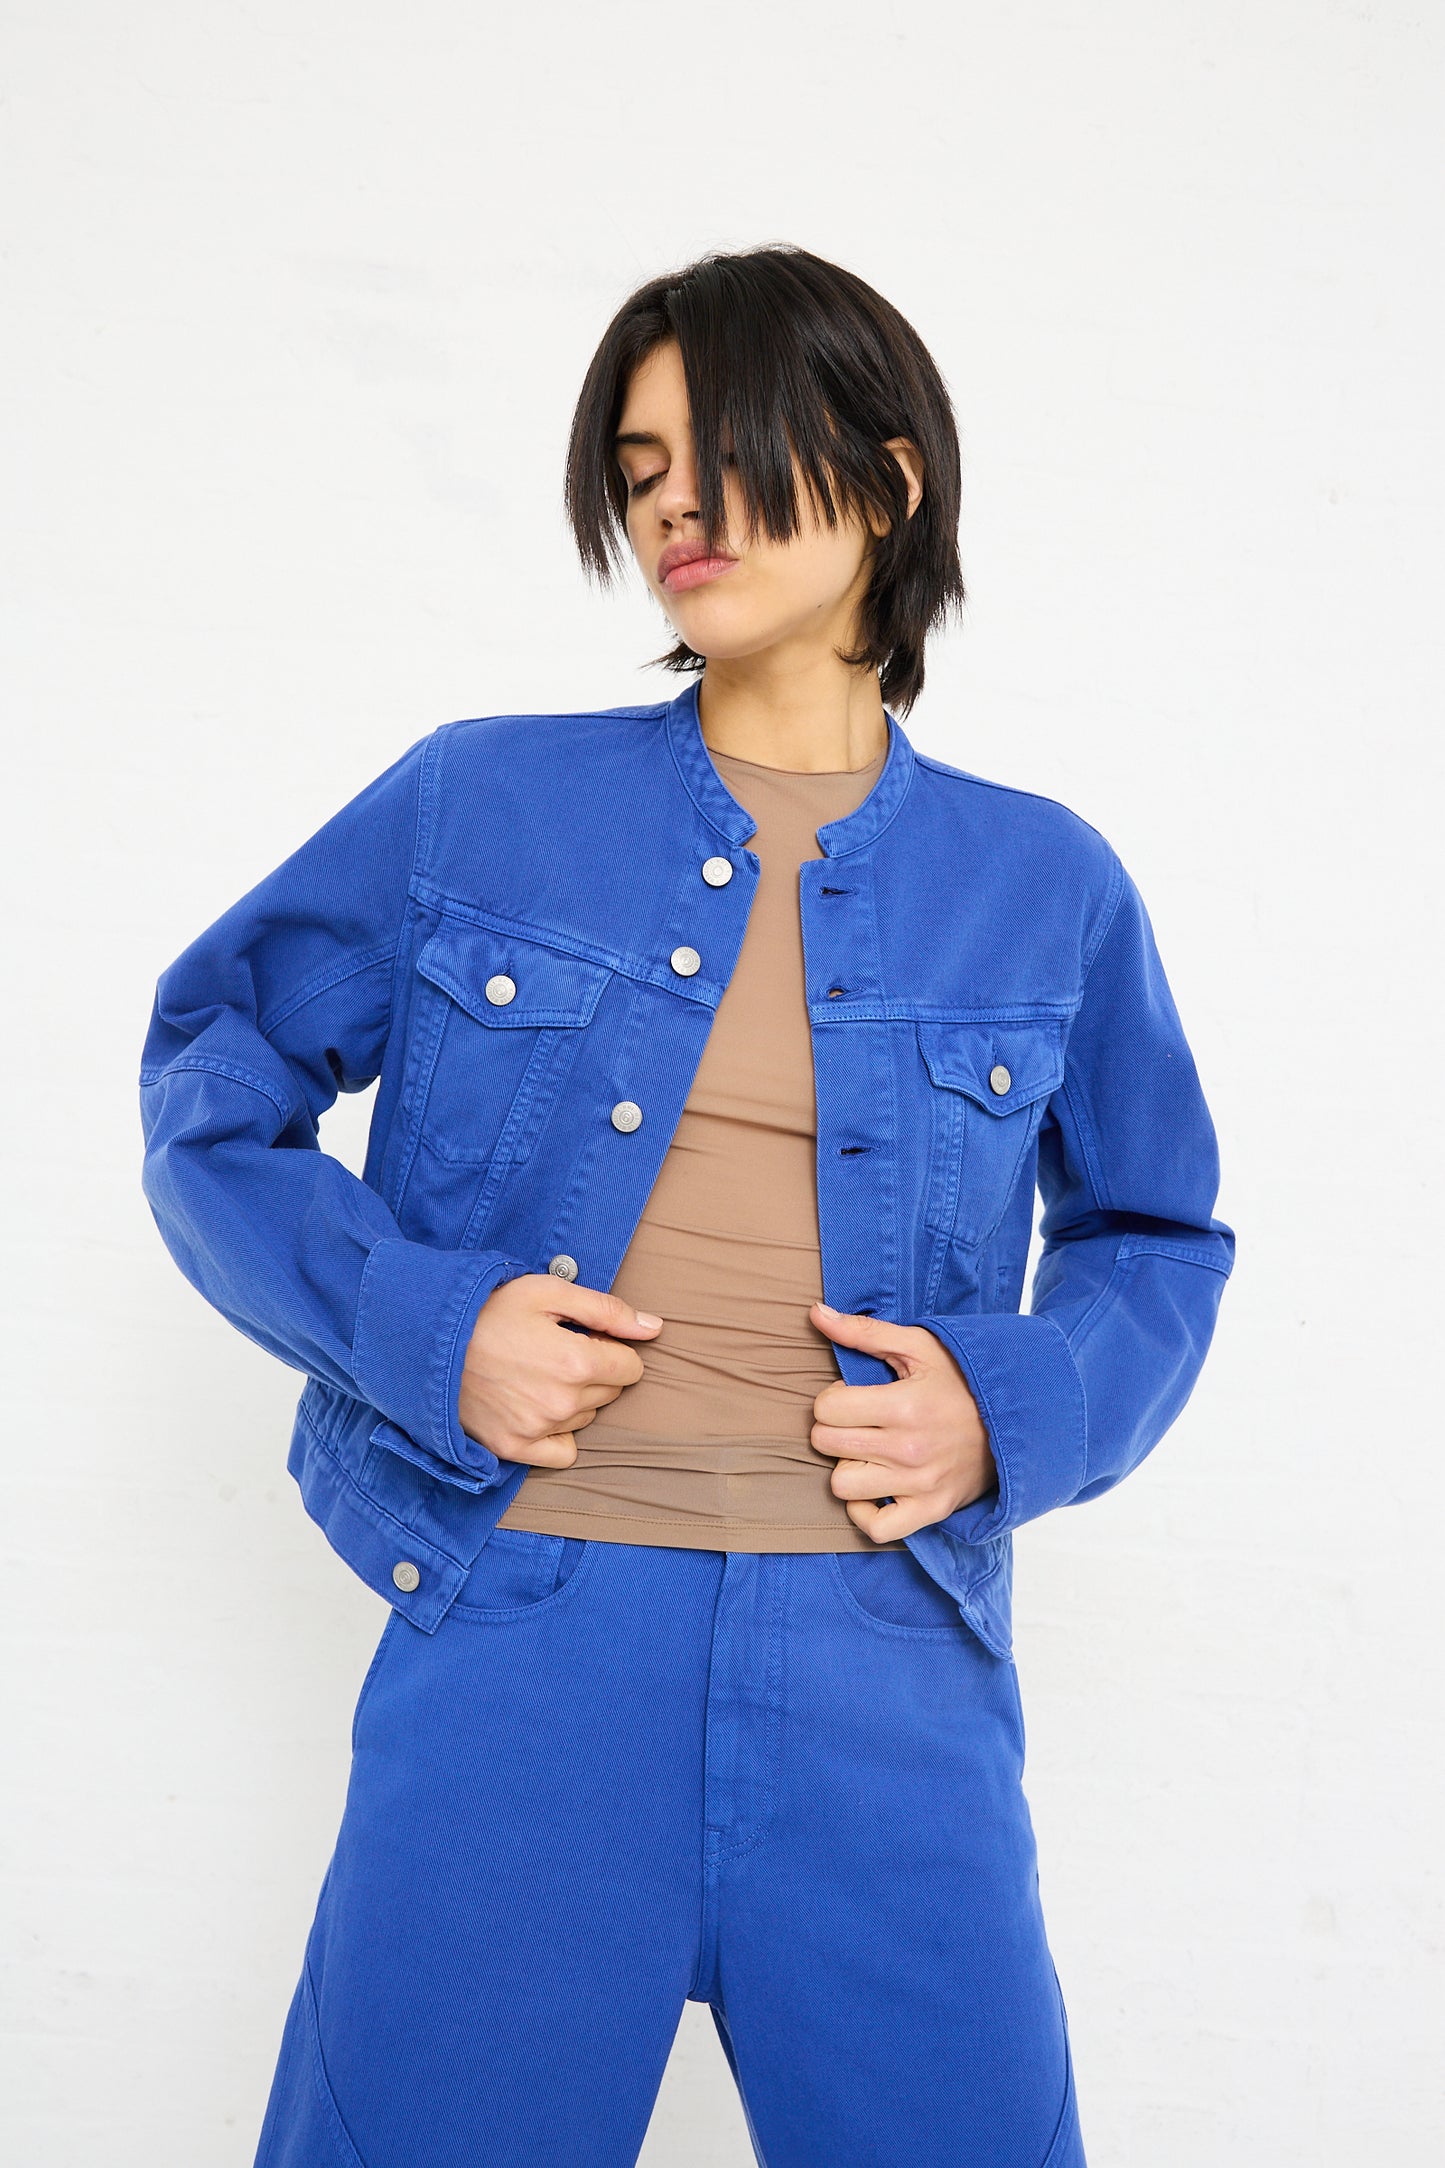 A woman in a blue MM6 Sports Jacket denim jacket and matching pants, standing against a white background, holding her jacket open.